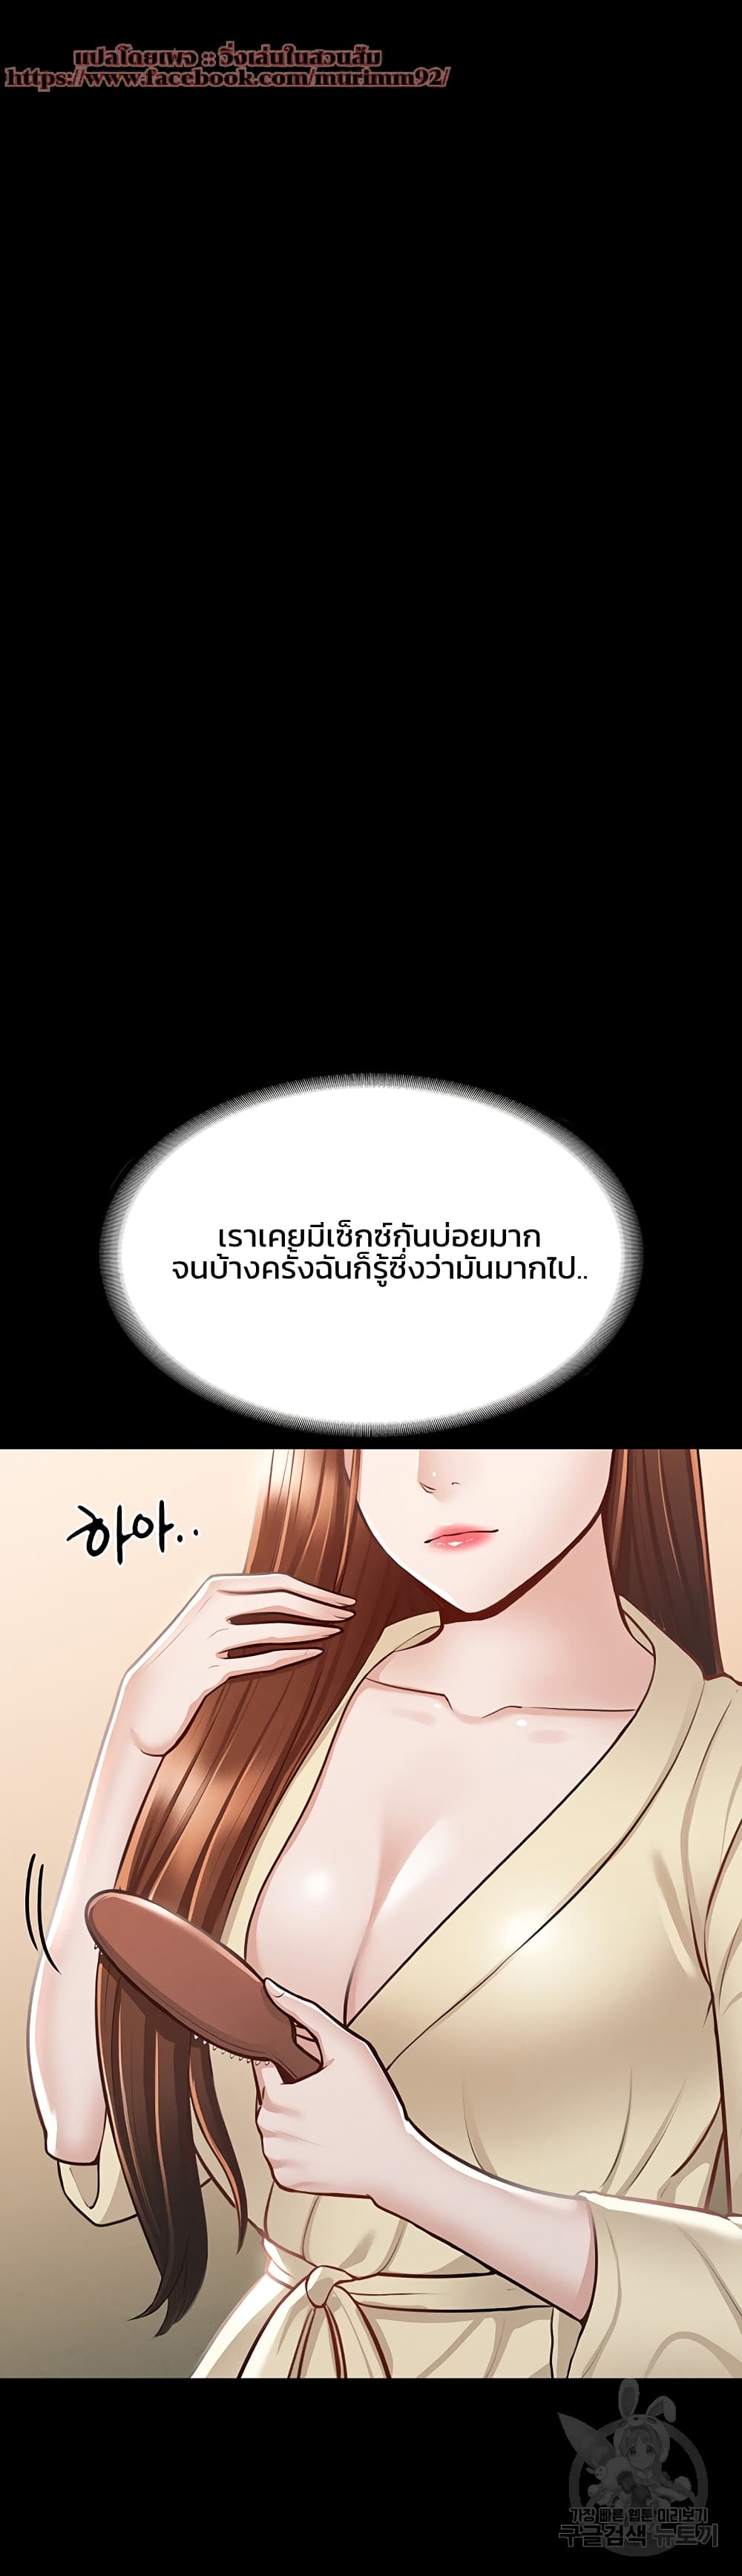 Workplace Manager Privileges ตอนที่ 9 ภาพ 5